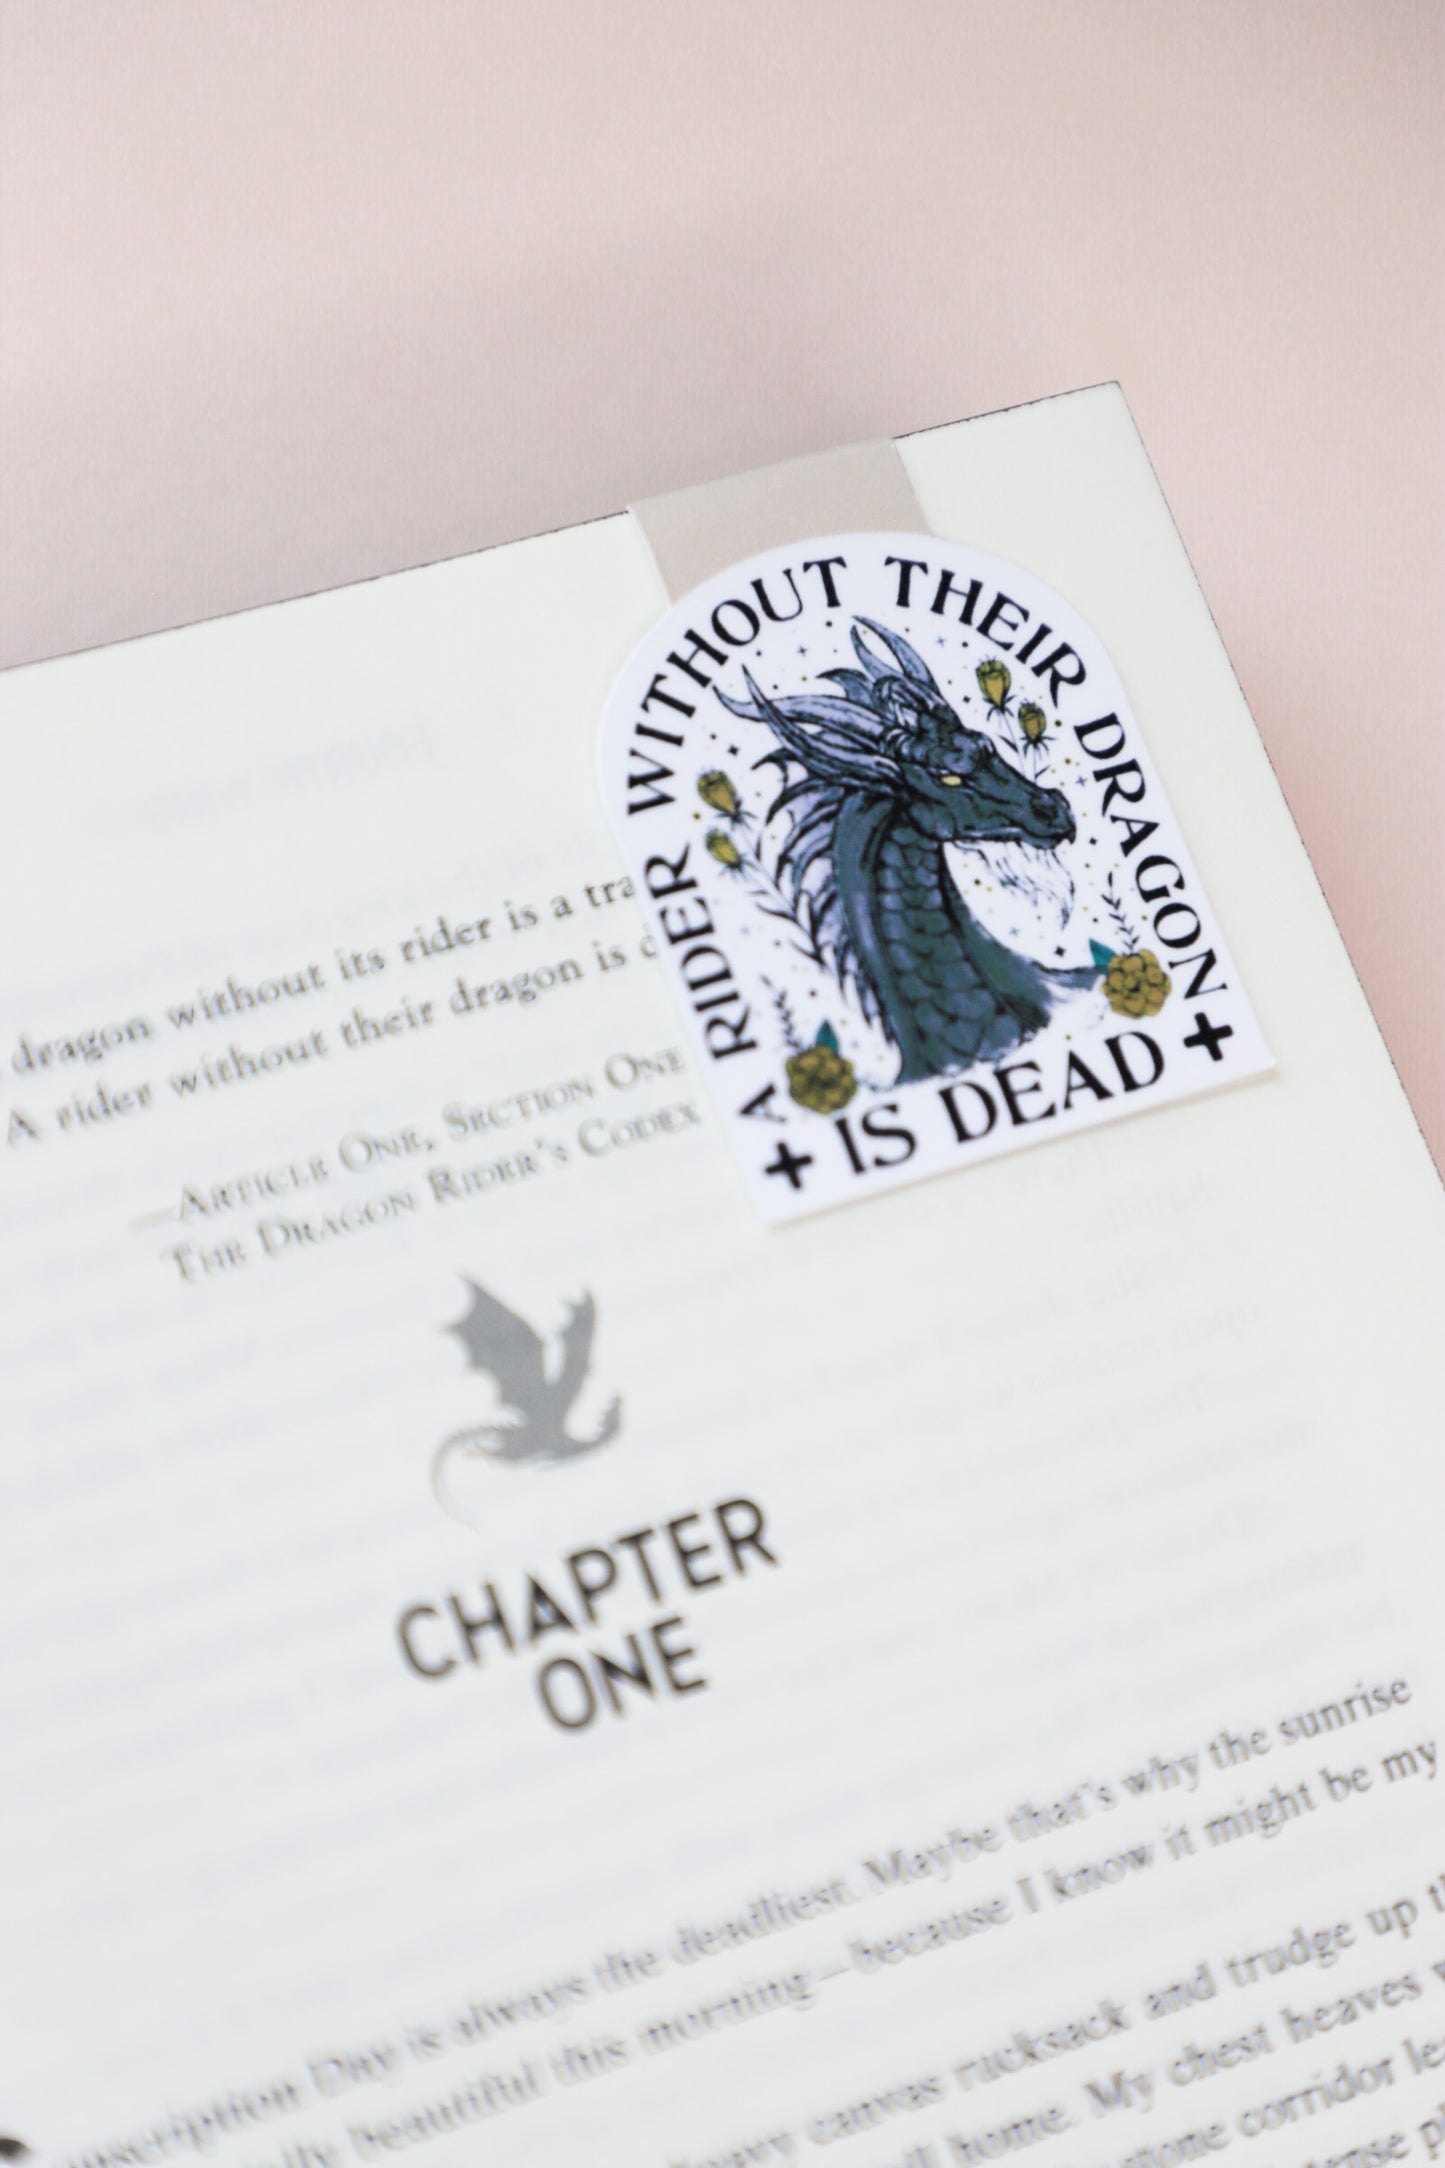 A Rider Without Their Dragon Is Dead Magnetic Bookmark